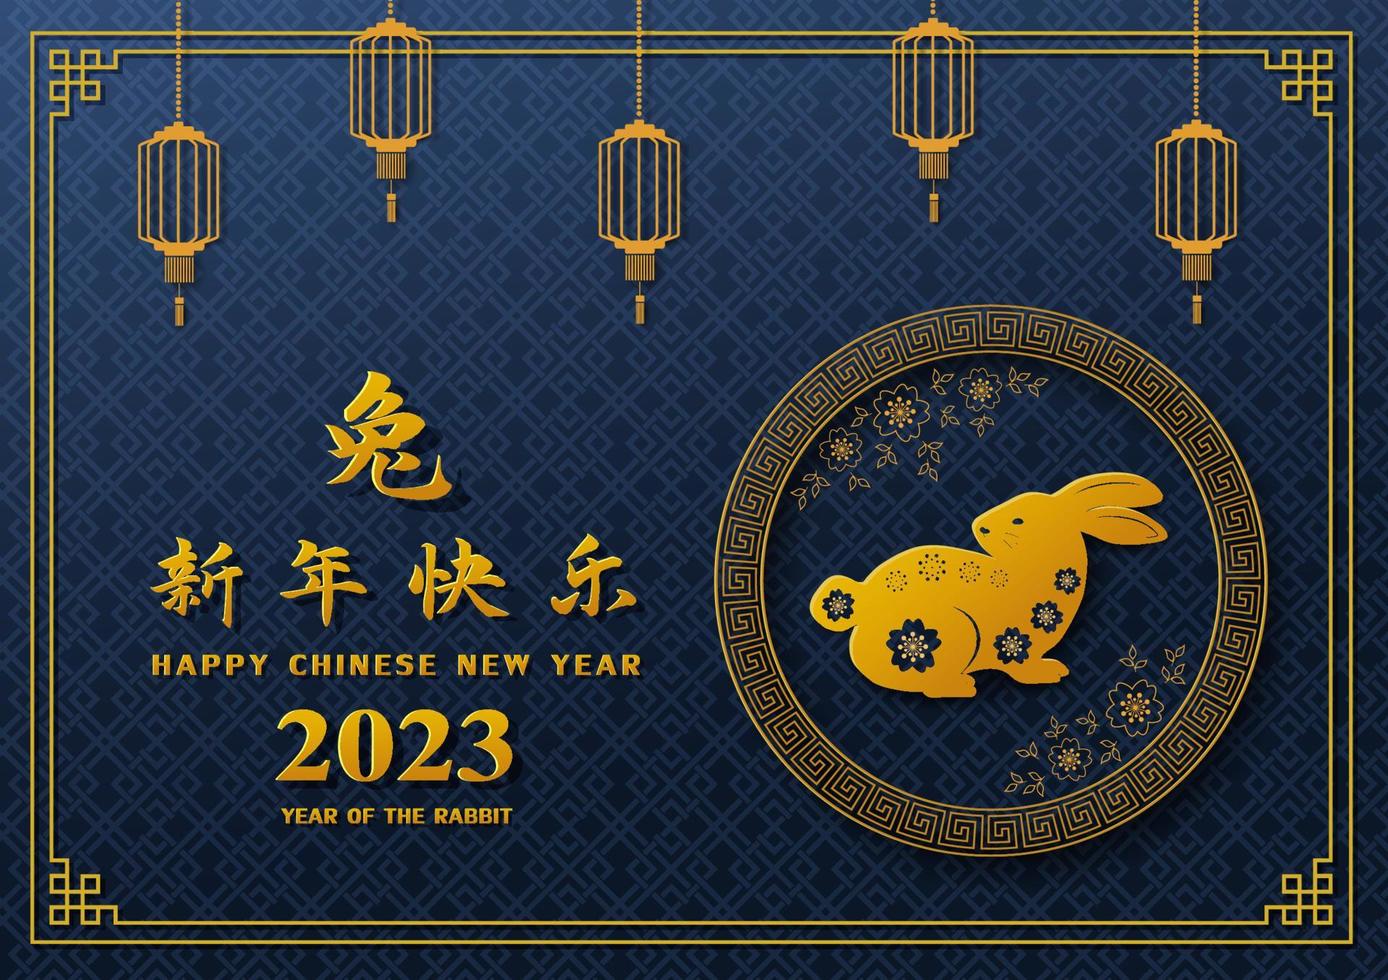 Happy Chinese New Year 2023,year of the rabbit with gold asian elements on blue background vector